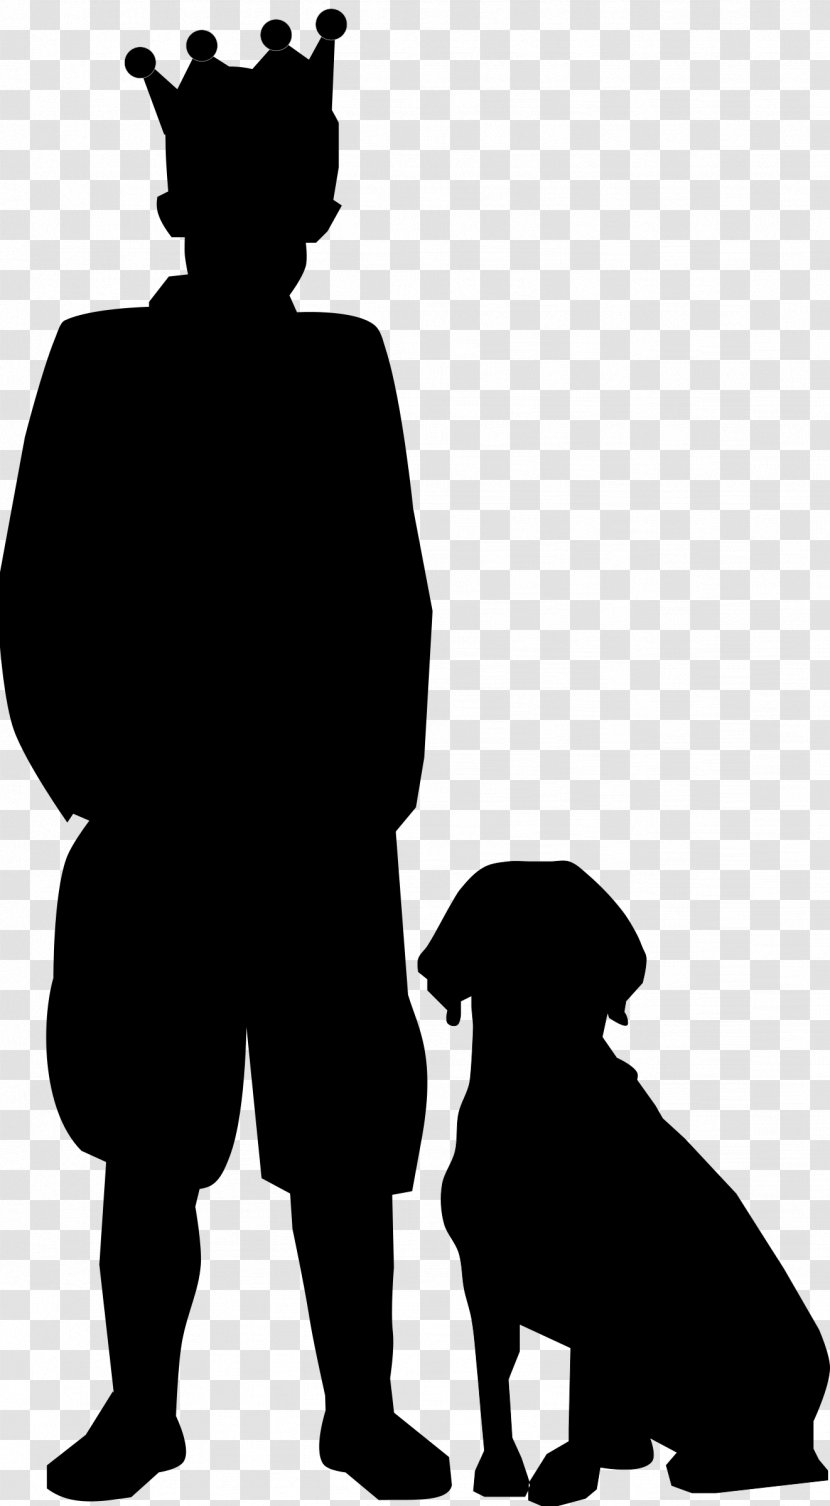 Silhouette Dog Clip Art - Animal Silhouettes Transparent PNG